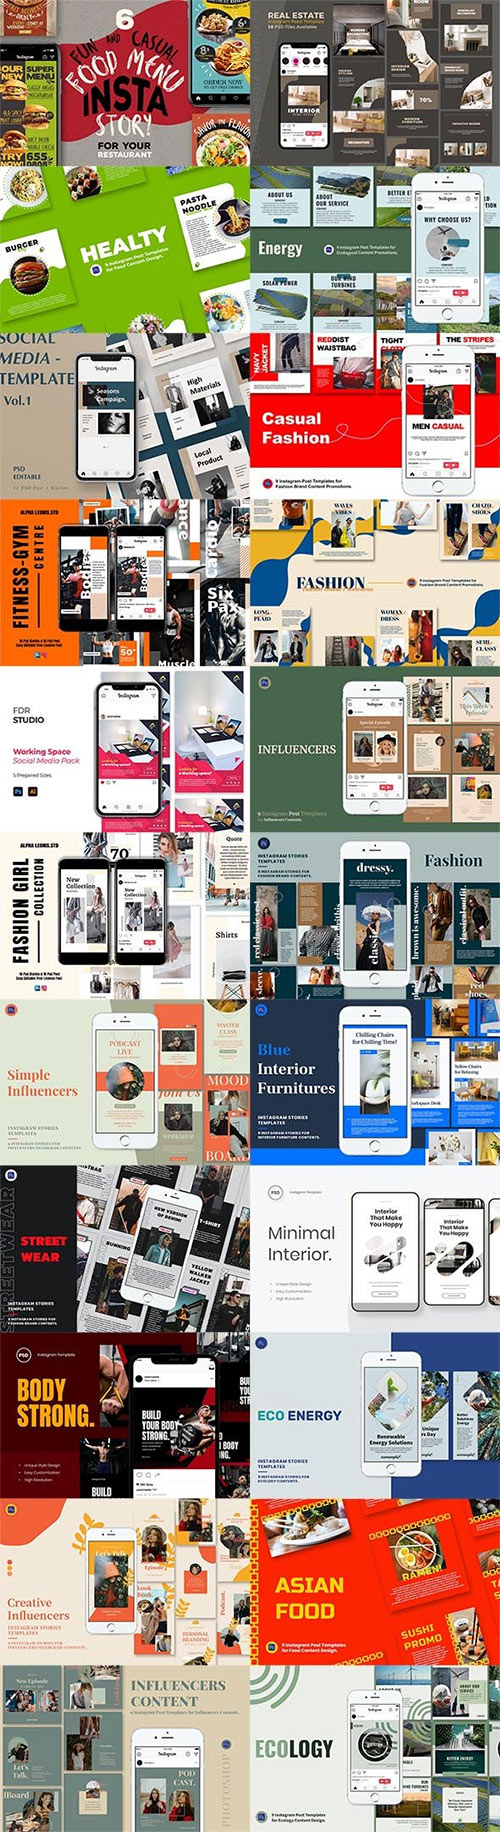 Instagram Posts and Stories Templates Pack